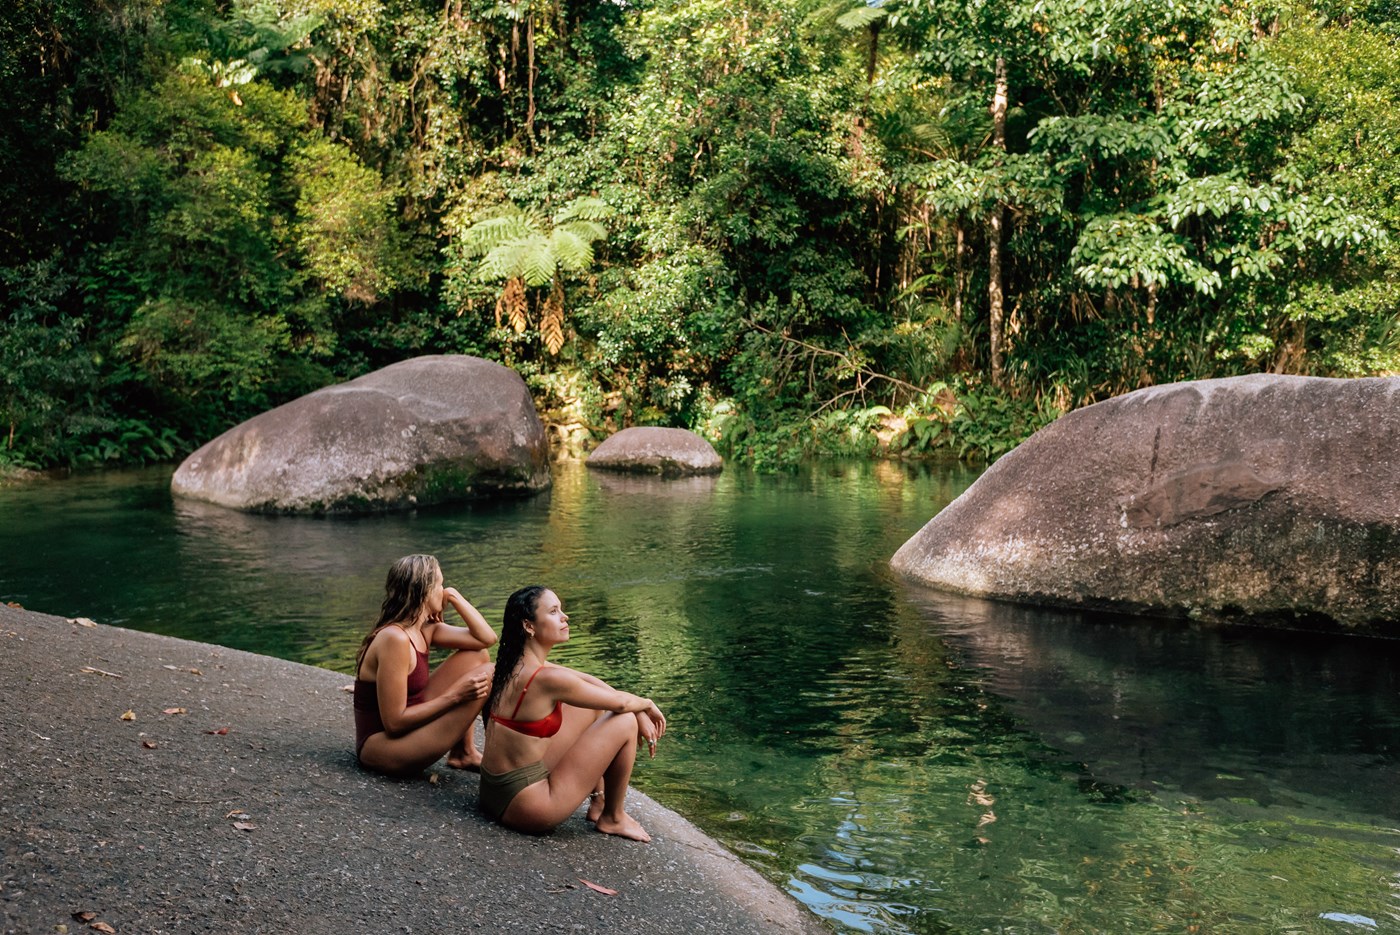 Two people sitting on a large rock gazing into the water, surrounded by leafy dense rainforest